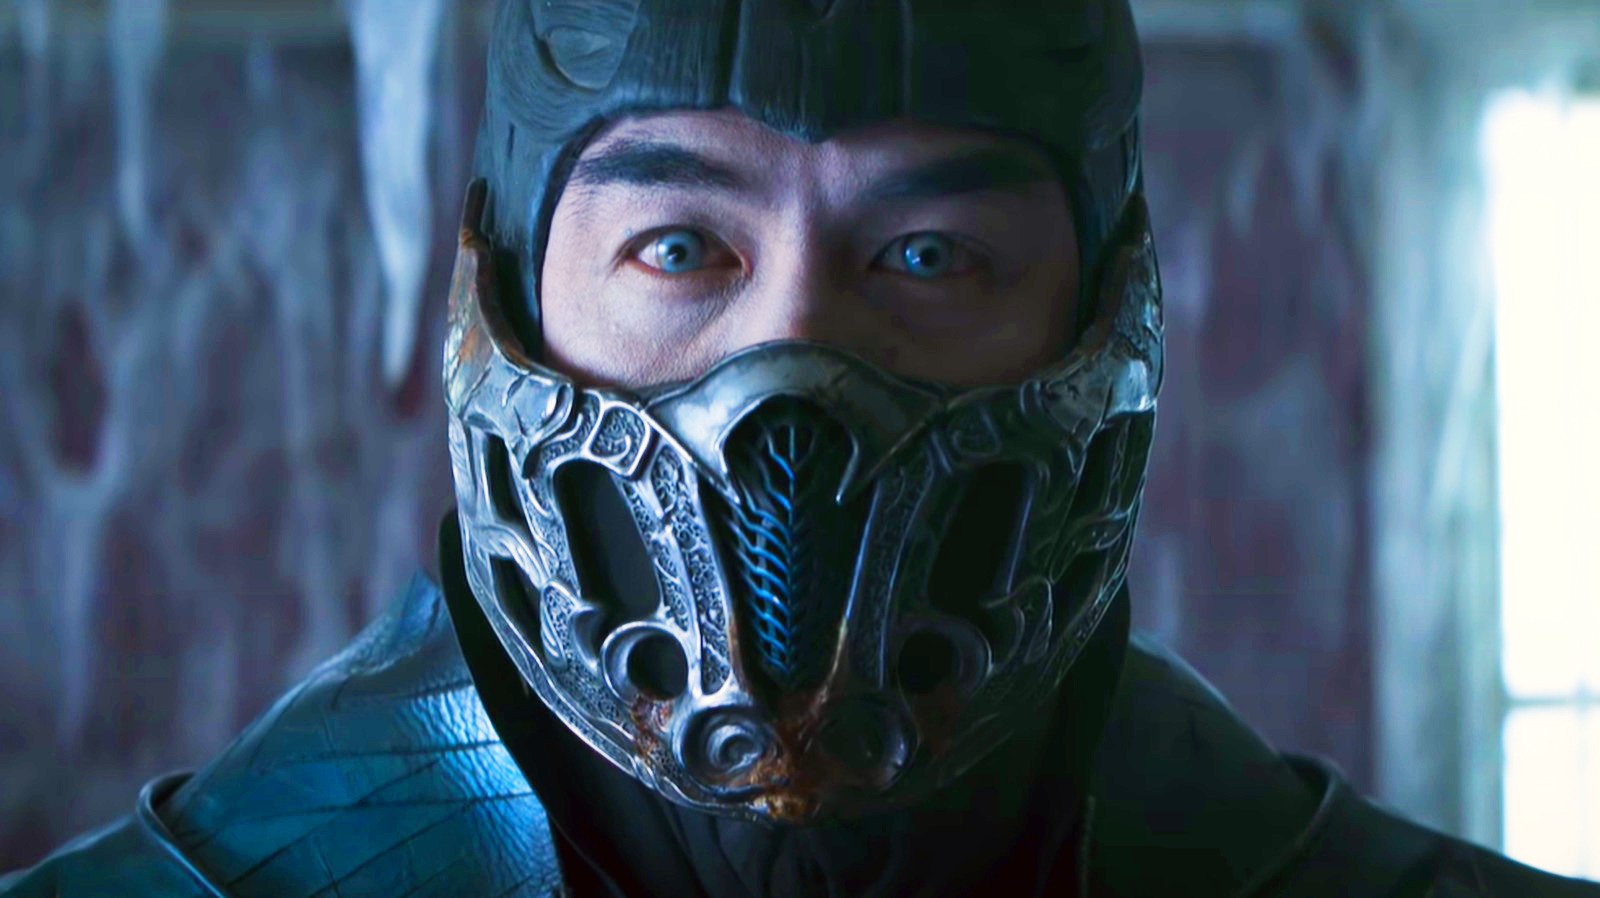 Small Details You Missed In The Mortal Kombat Movie Trailer